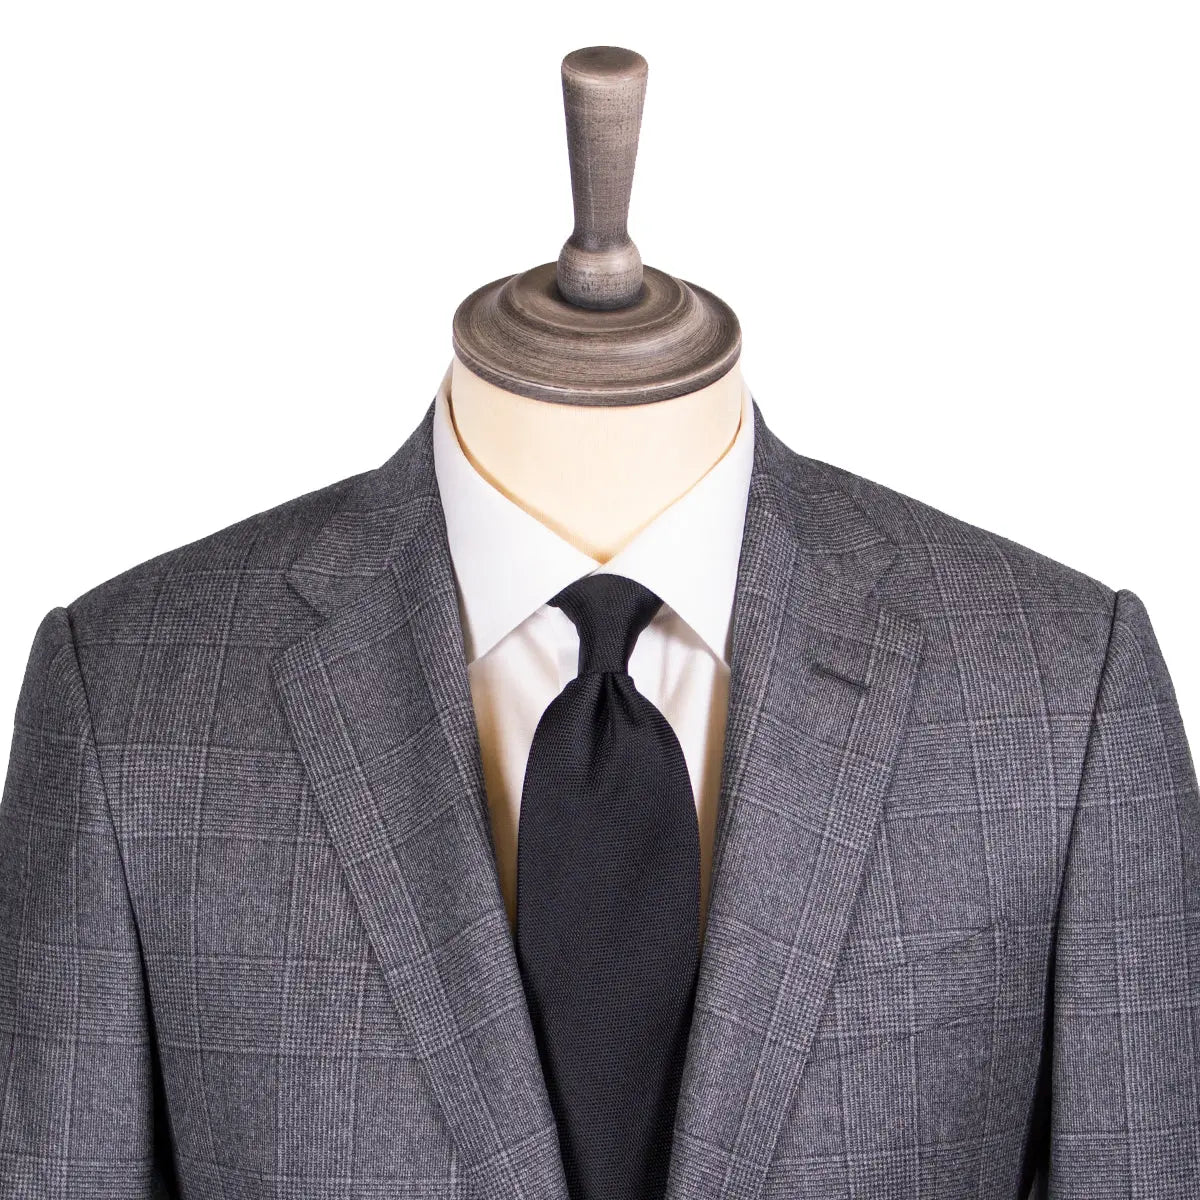 Grey Prince of Wales Check Wool Suit  Robert Old   